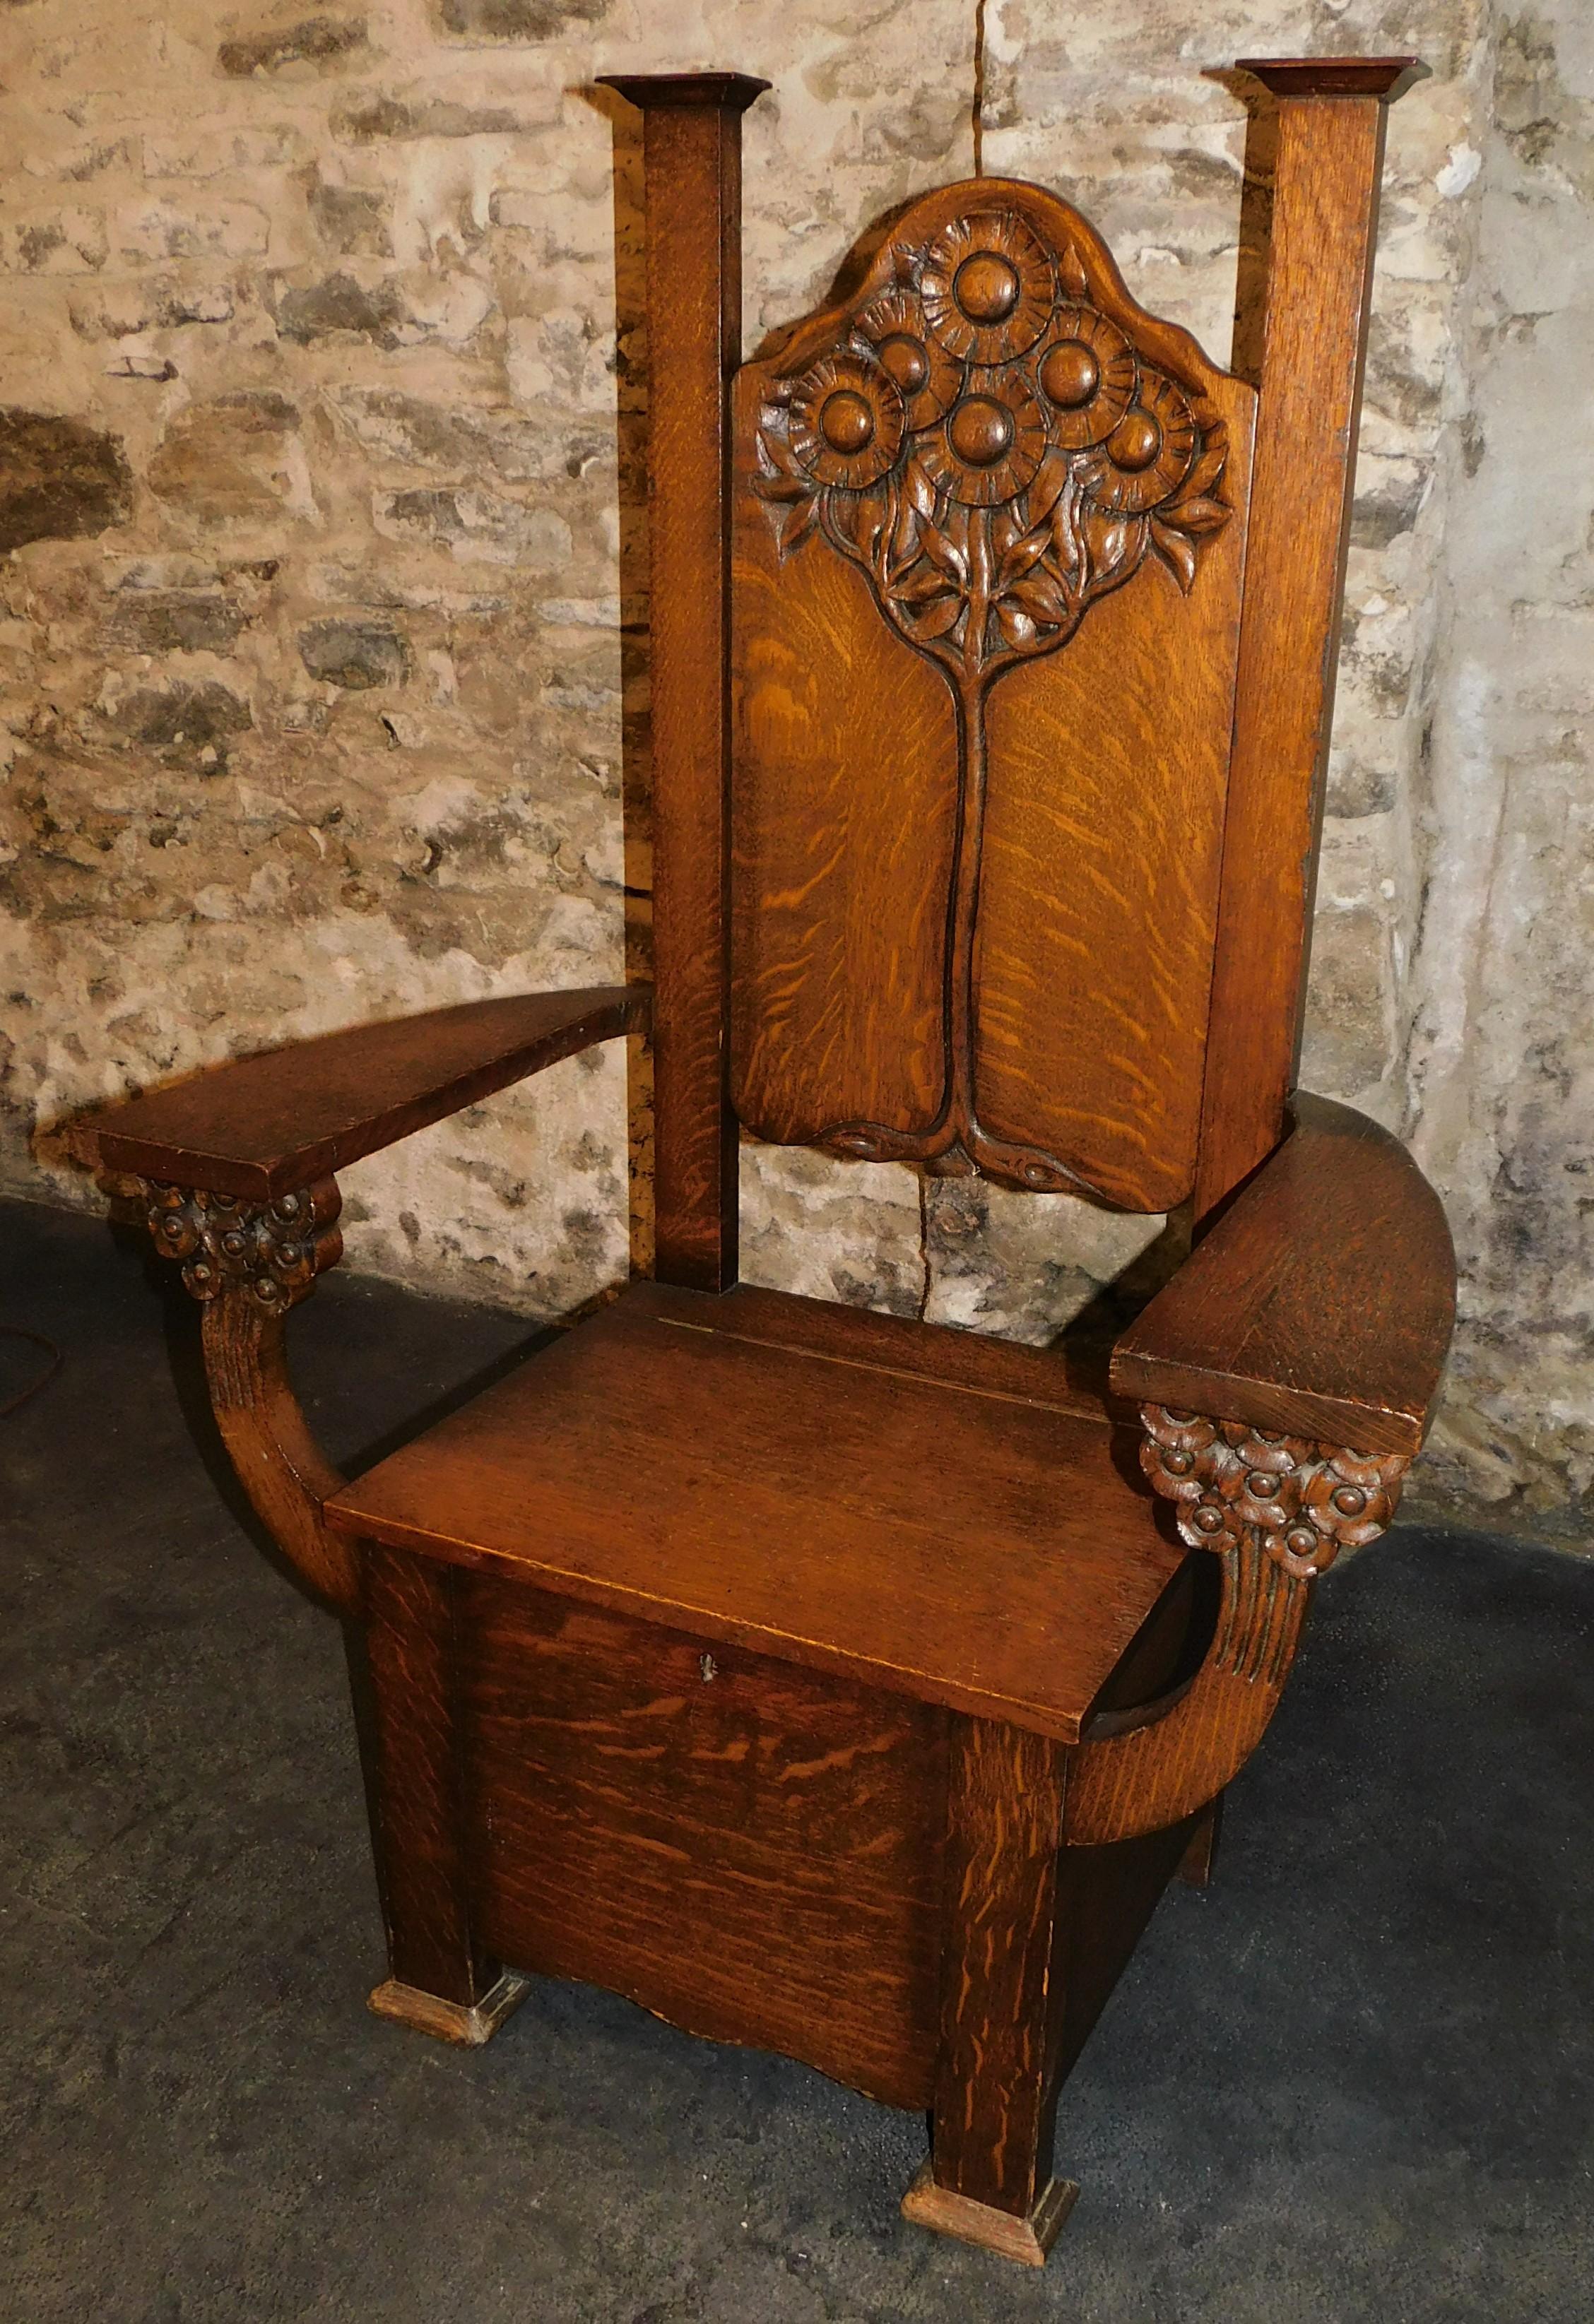 Attributed to Edwin Ridgeway this beautifully carved 19th century quarter cut oak Arts & Crafts mission, captains chair or hall bench. With carved sunflowers or daisy's under the arms, with a tree of life design on seat back. With locked storage,